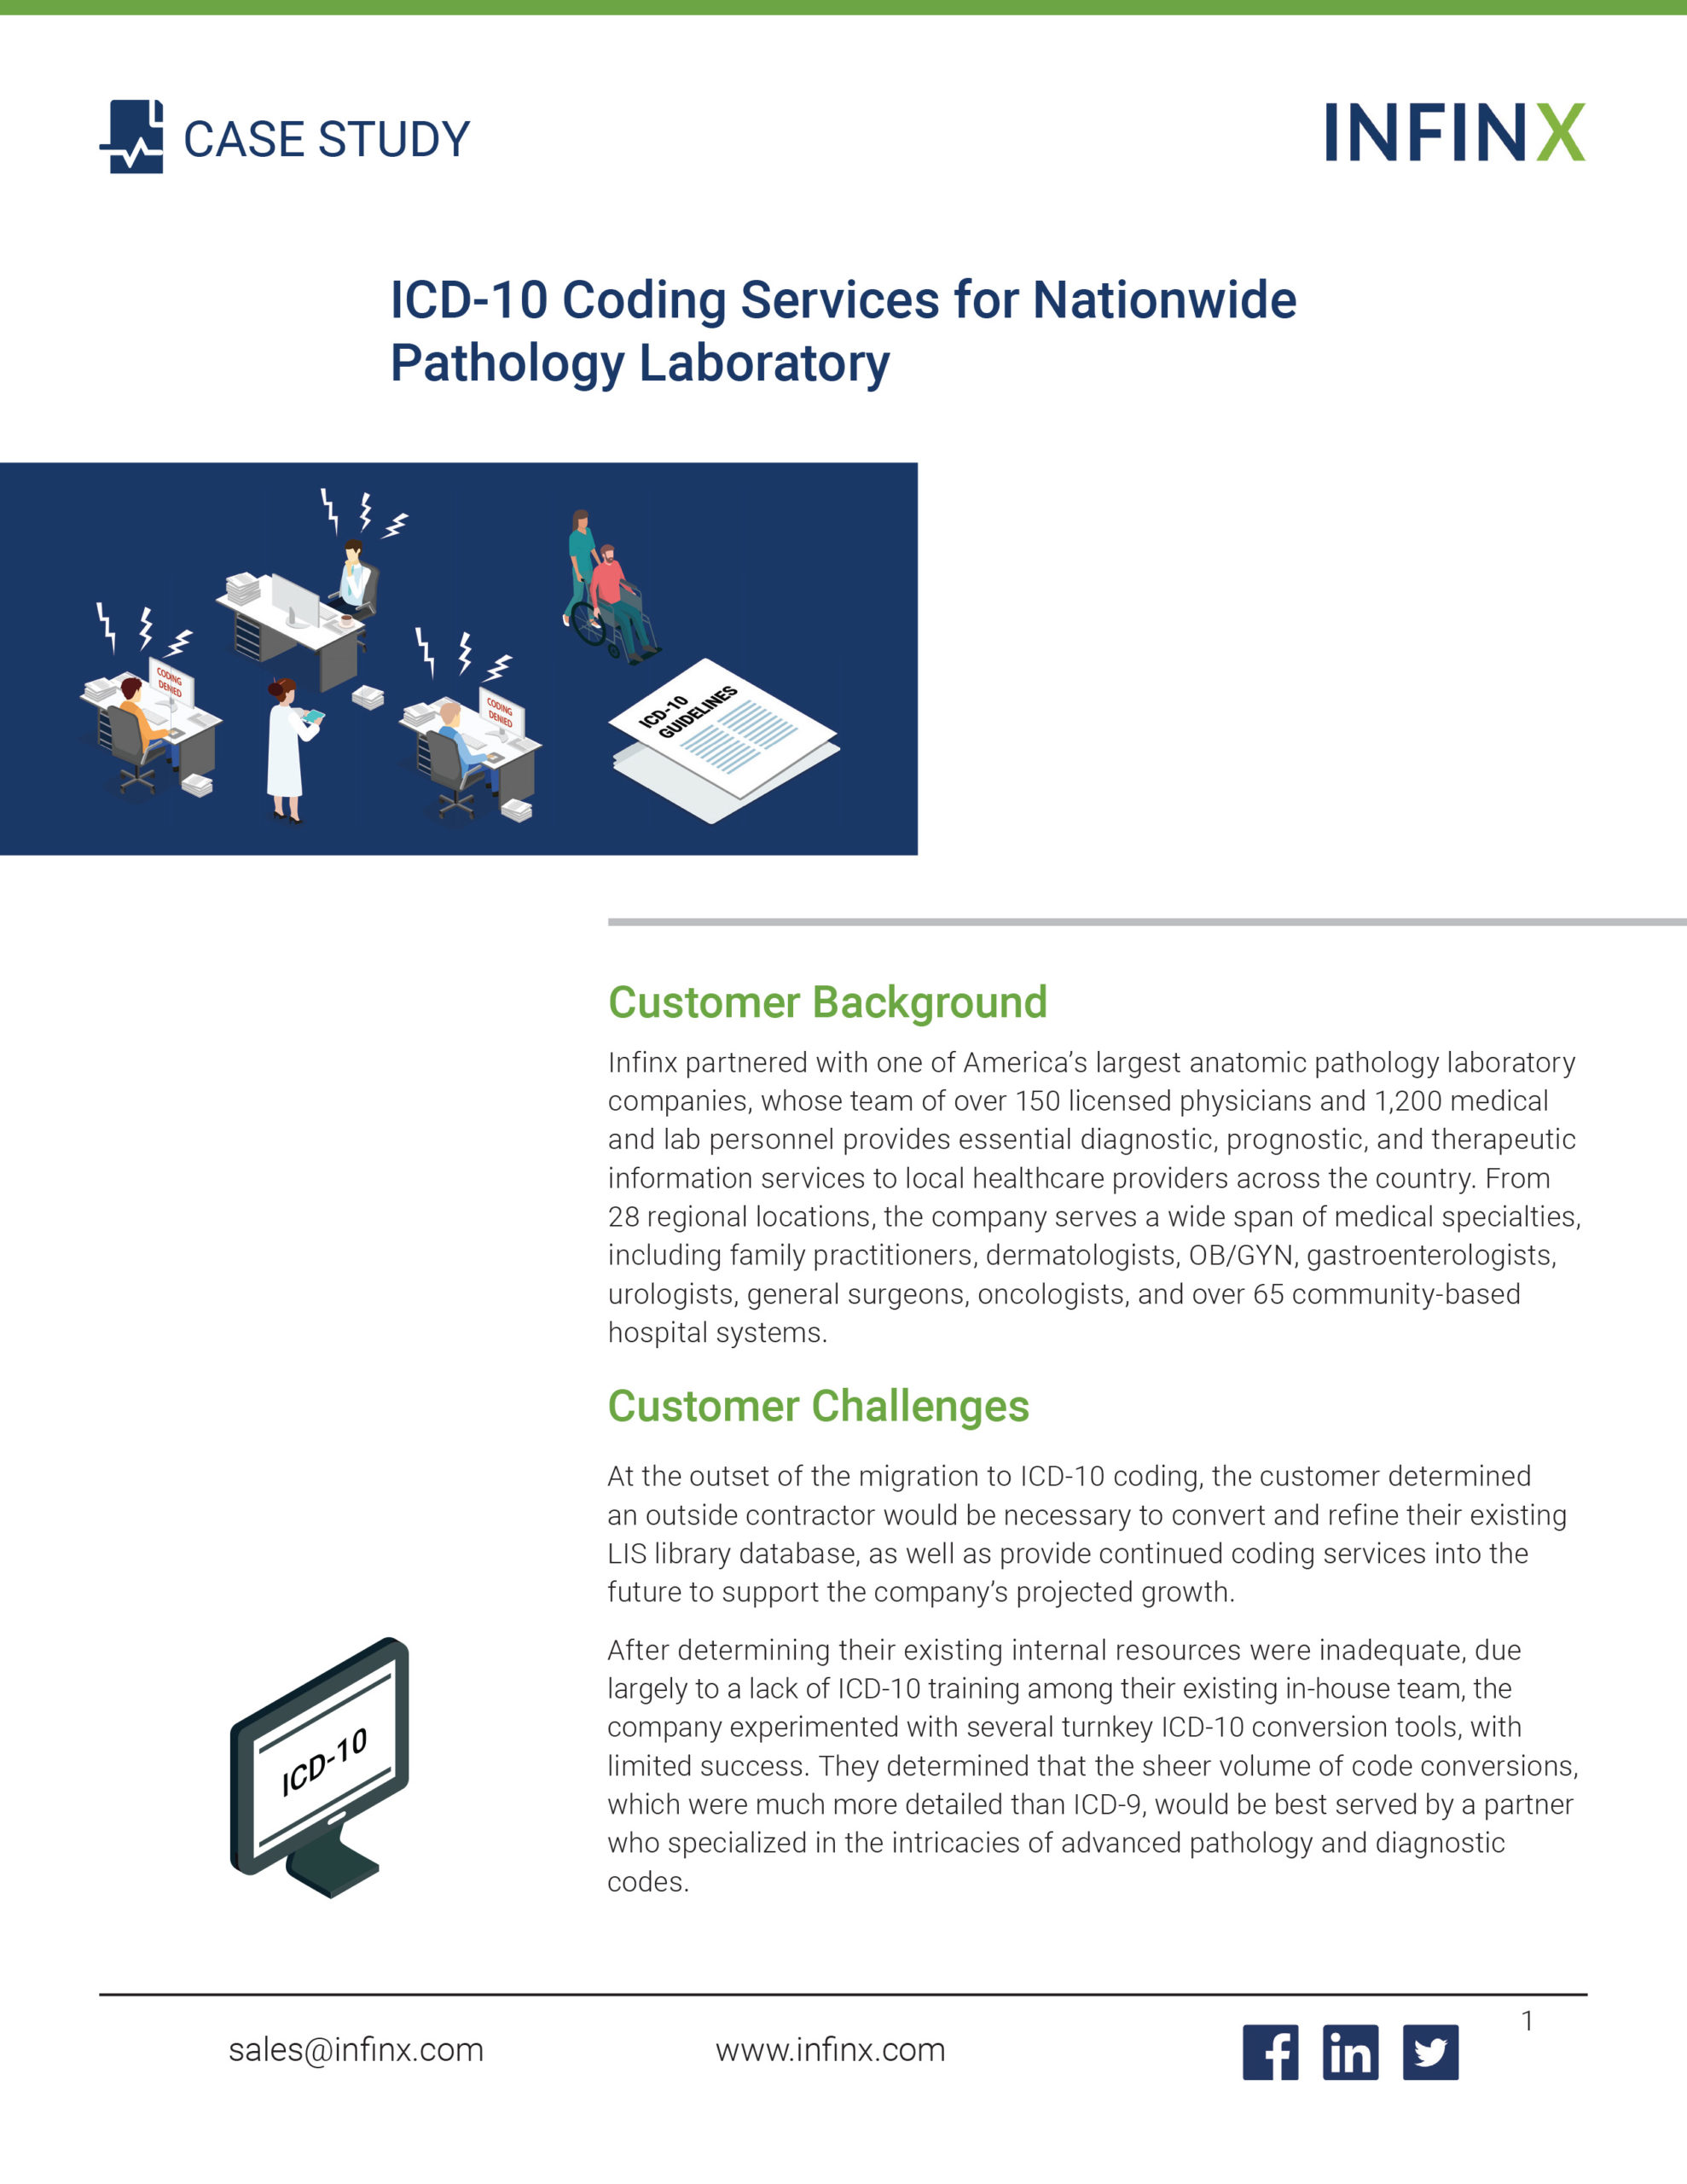 Infinx-case-study-ICD-10-Coding-Services-for-Nationwide-Pathology-Laboratory-April-10-2020-p1